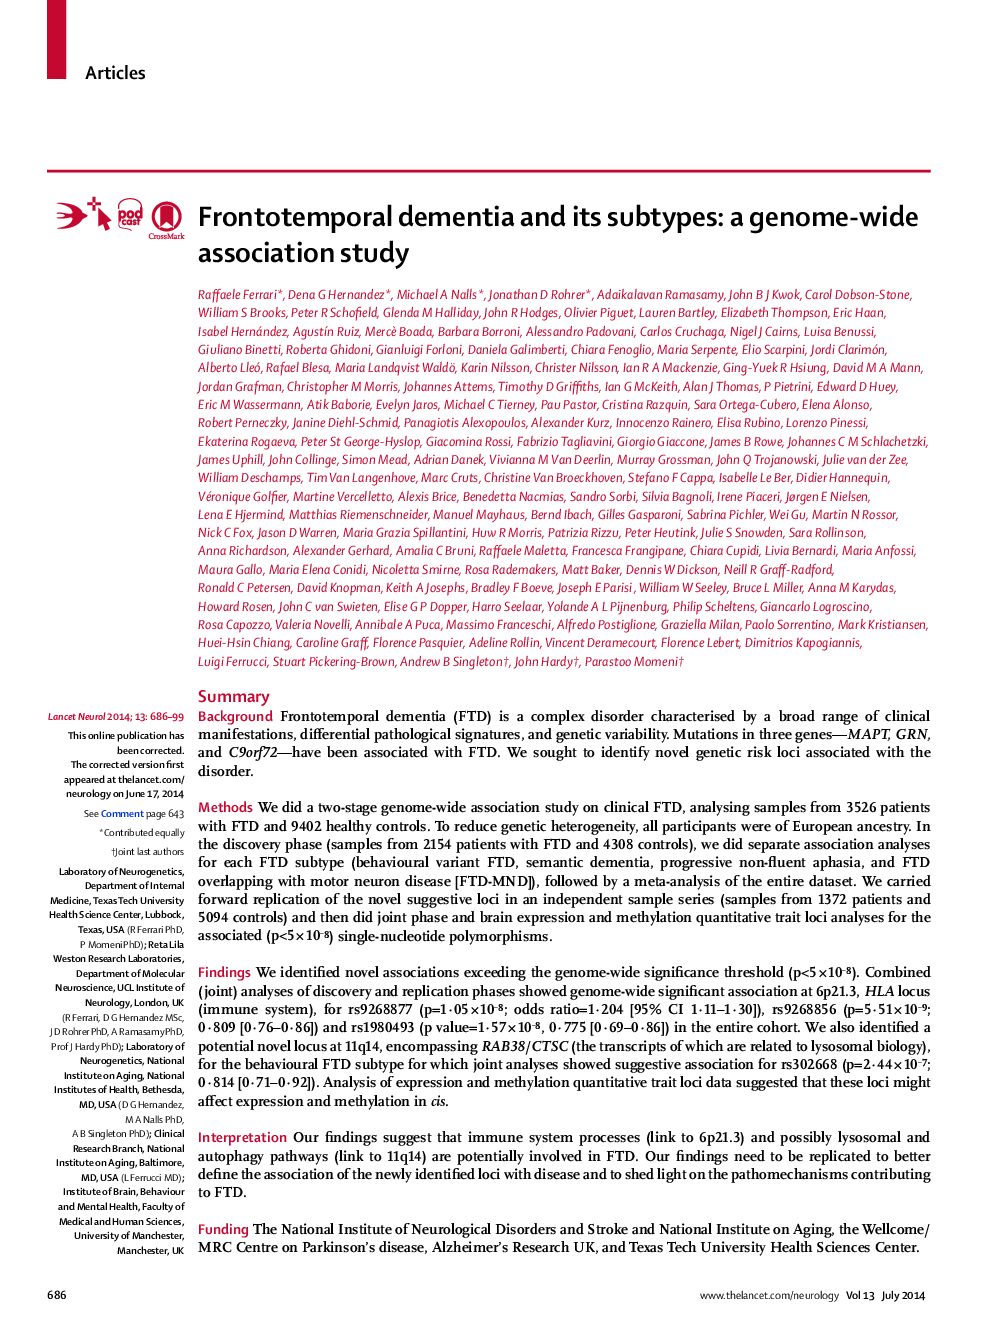 Frontotemporal dementia and its subtypes: a genome-wide association study